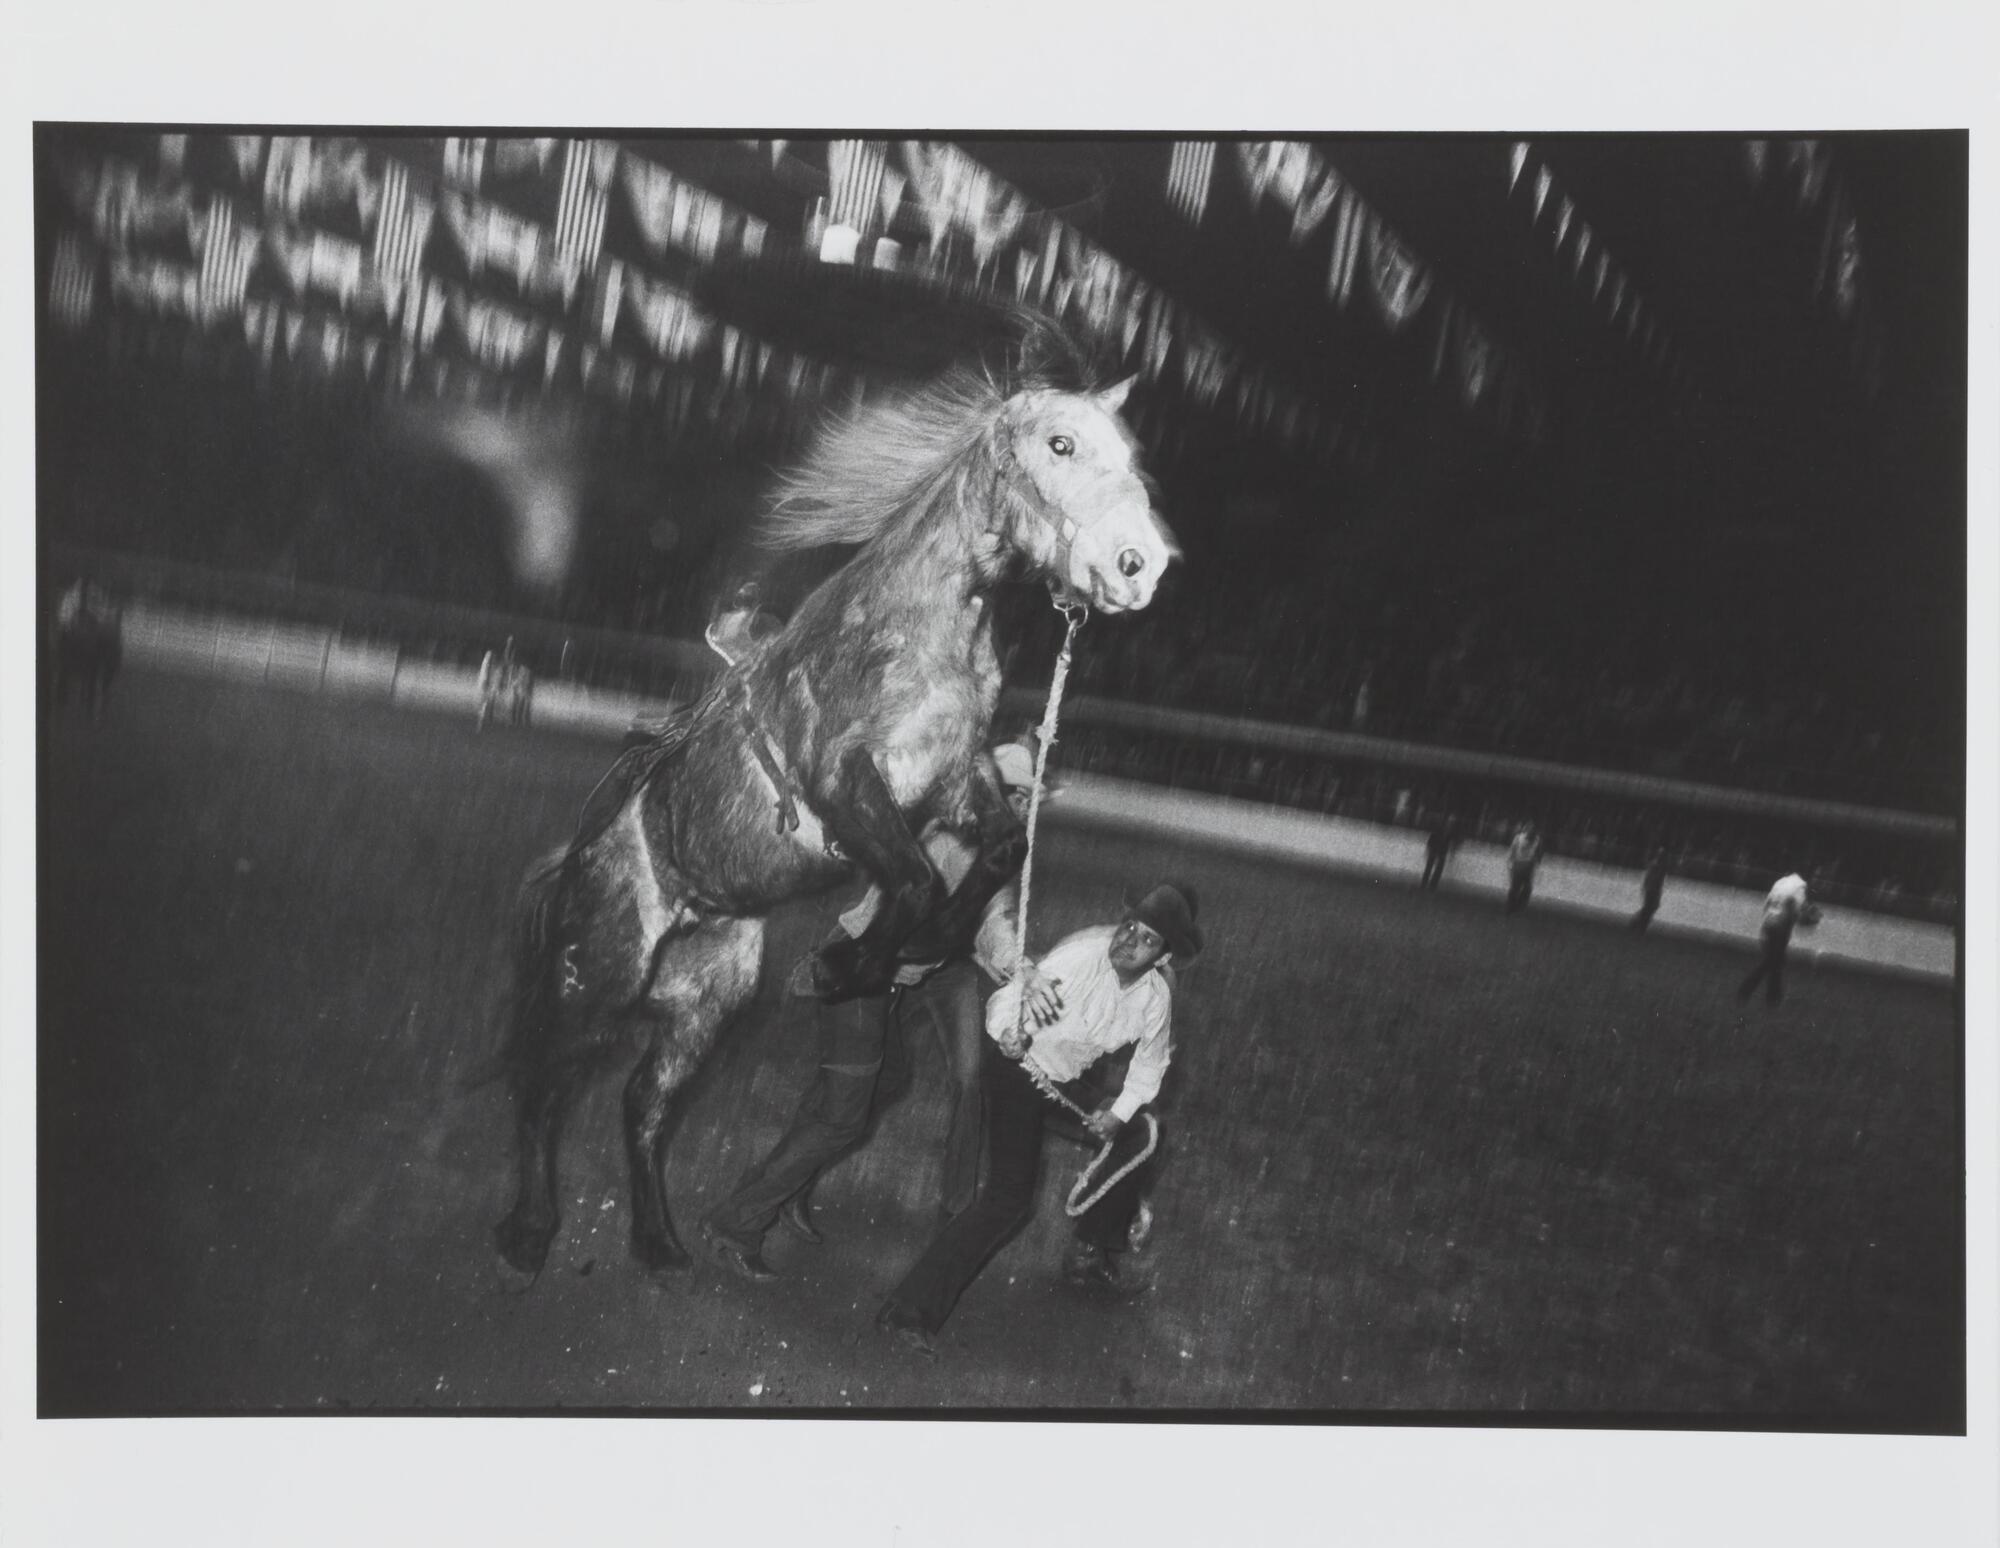 Photographed inside a rodeo arena, this image depicts a rearing horse and two men attempting to subdue it.